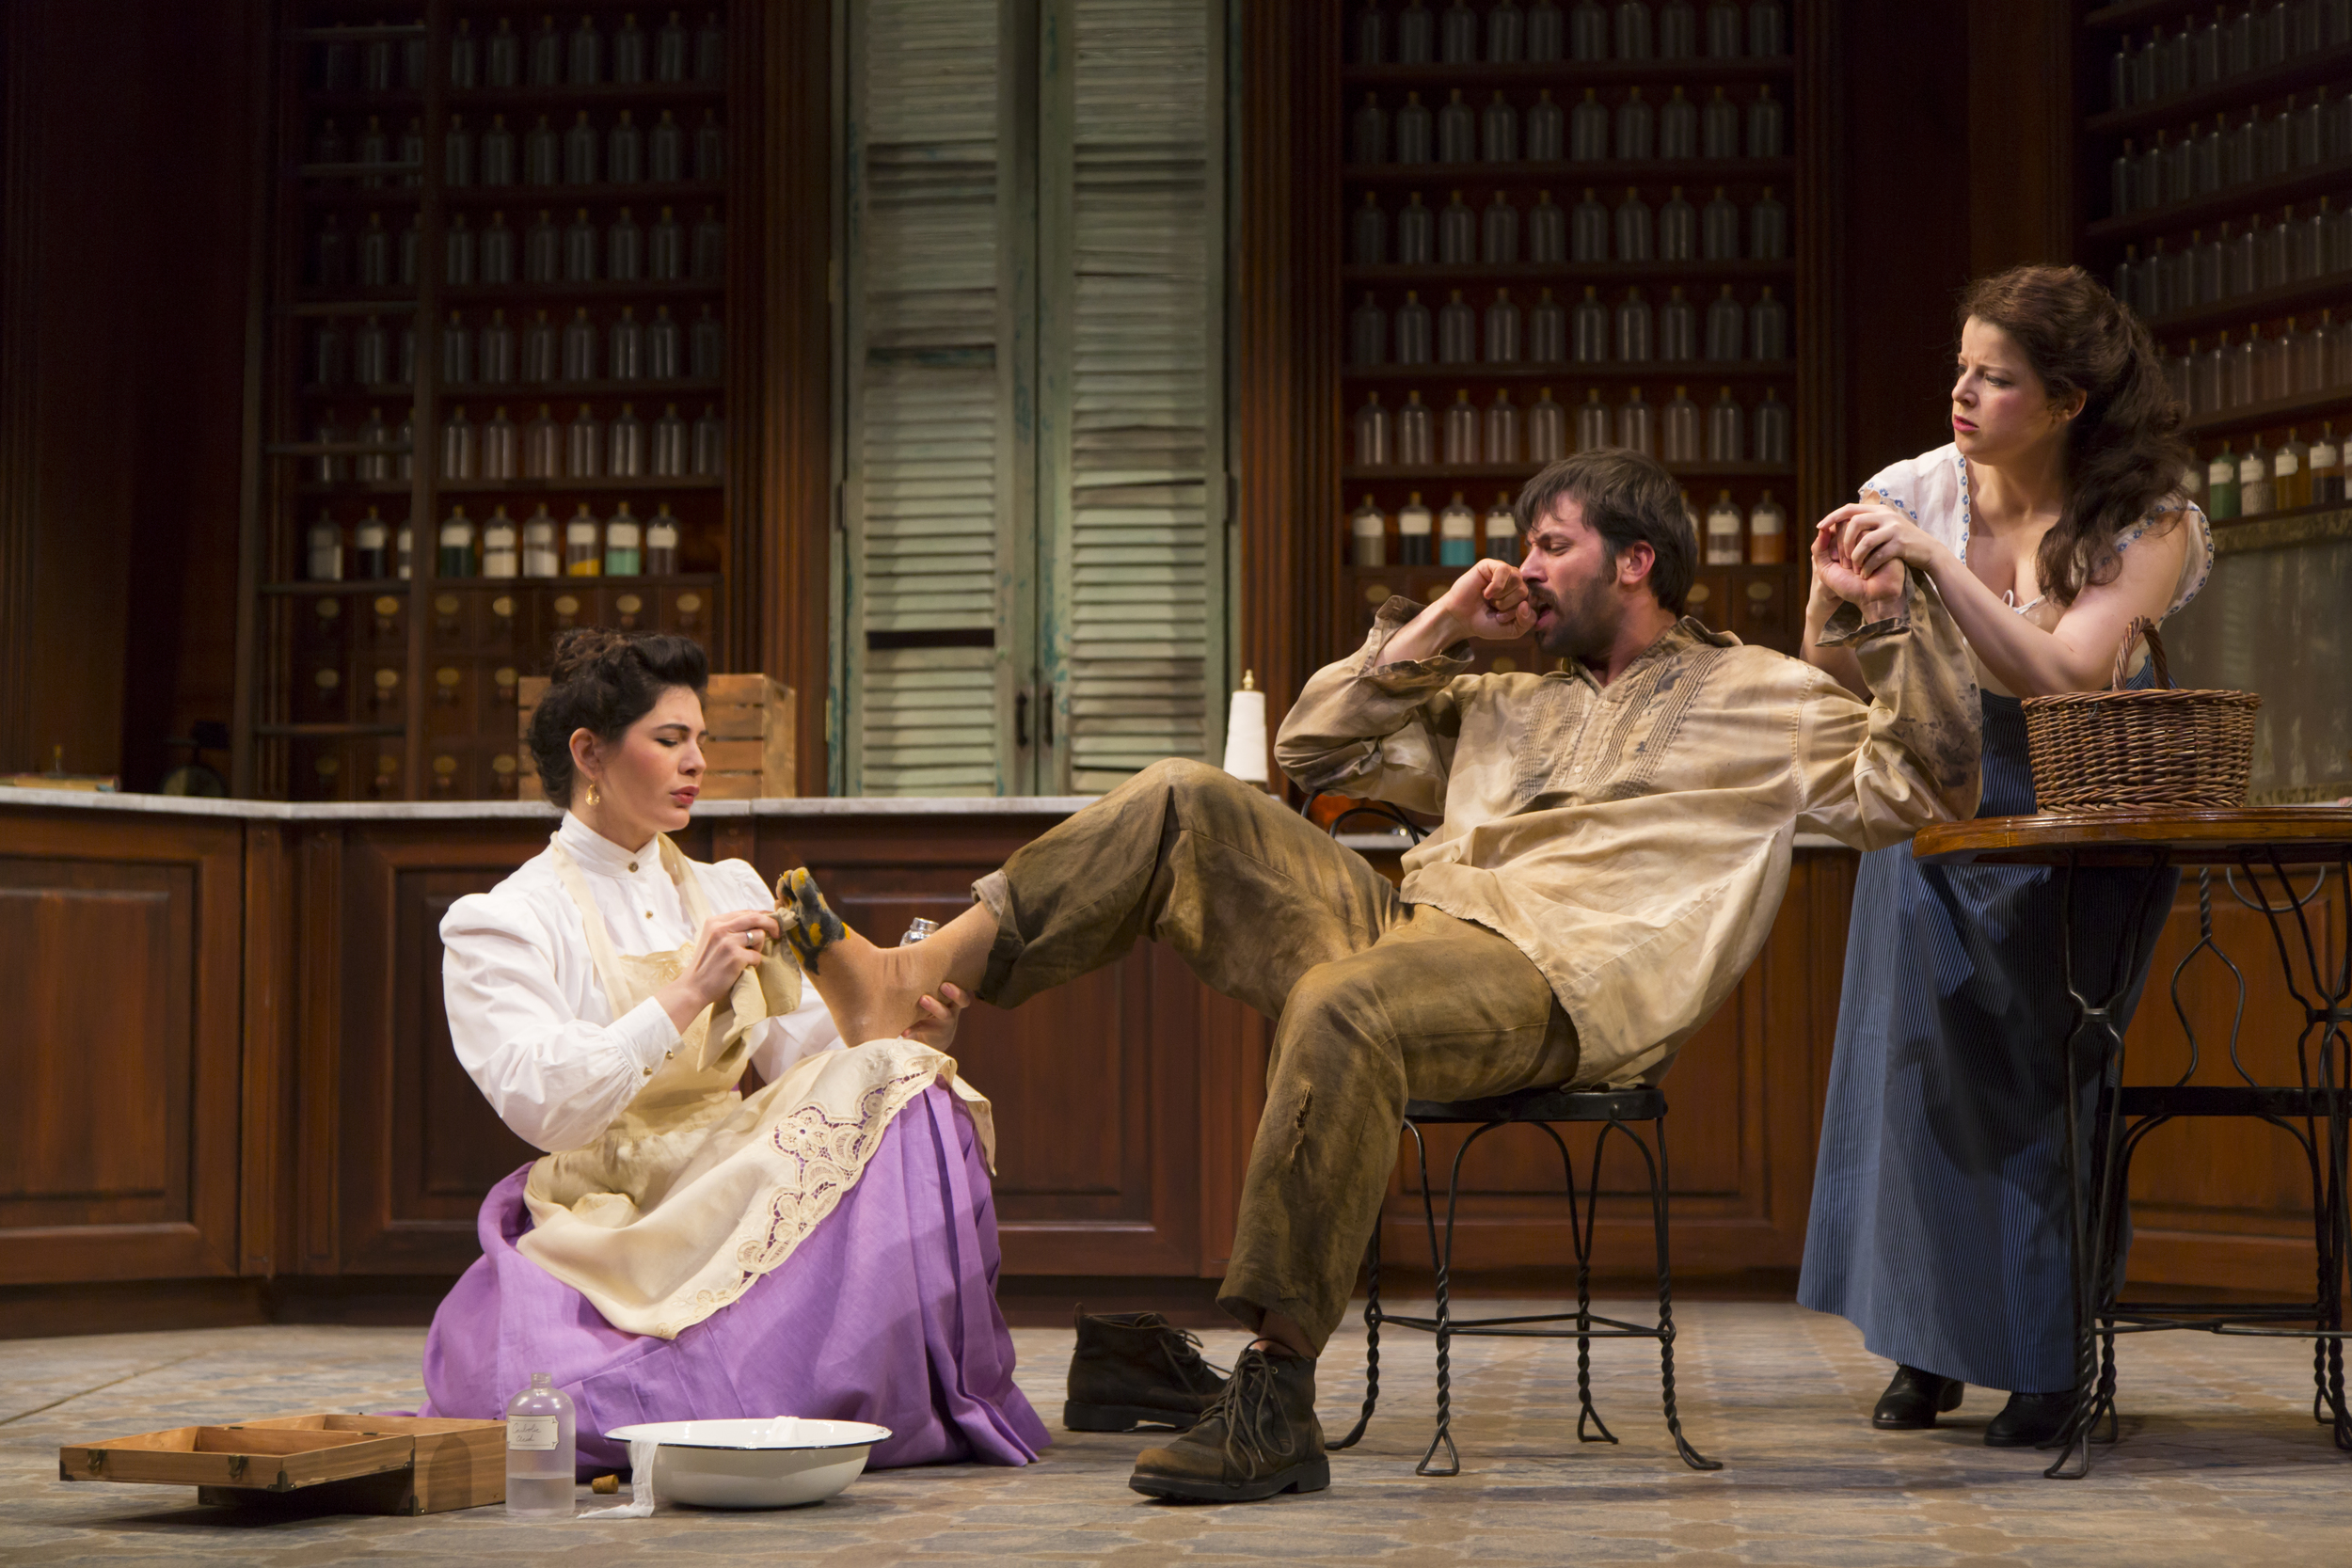  Christina Pumariega, Juan Javier Cardenas, and Rebecca Soler in the Huntington Theatre Company's production of Melinda Lopez's BECOMING CUBA.  March 28 - May 3, 2014 at South End / Calderwood Pavilion at the BCA. huntingtontheatre.org. Photo T. Char